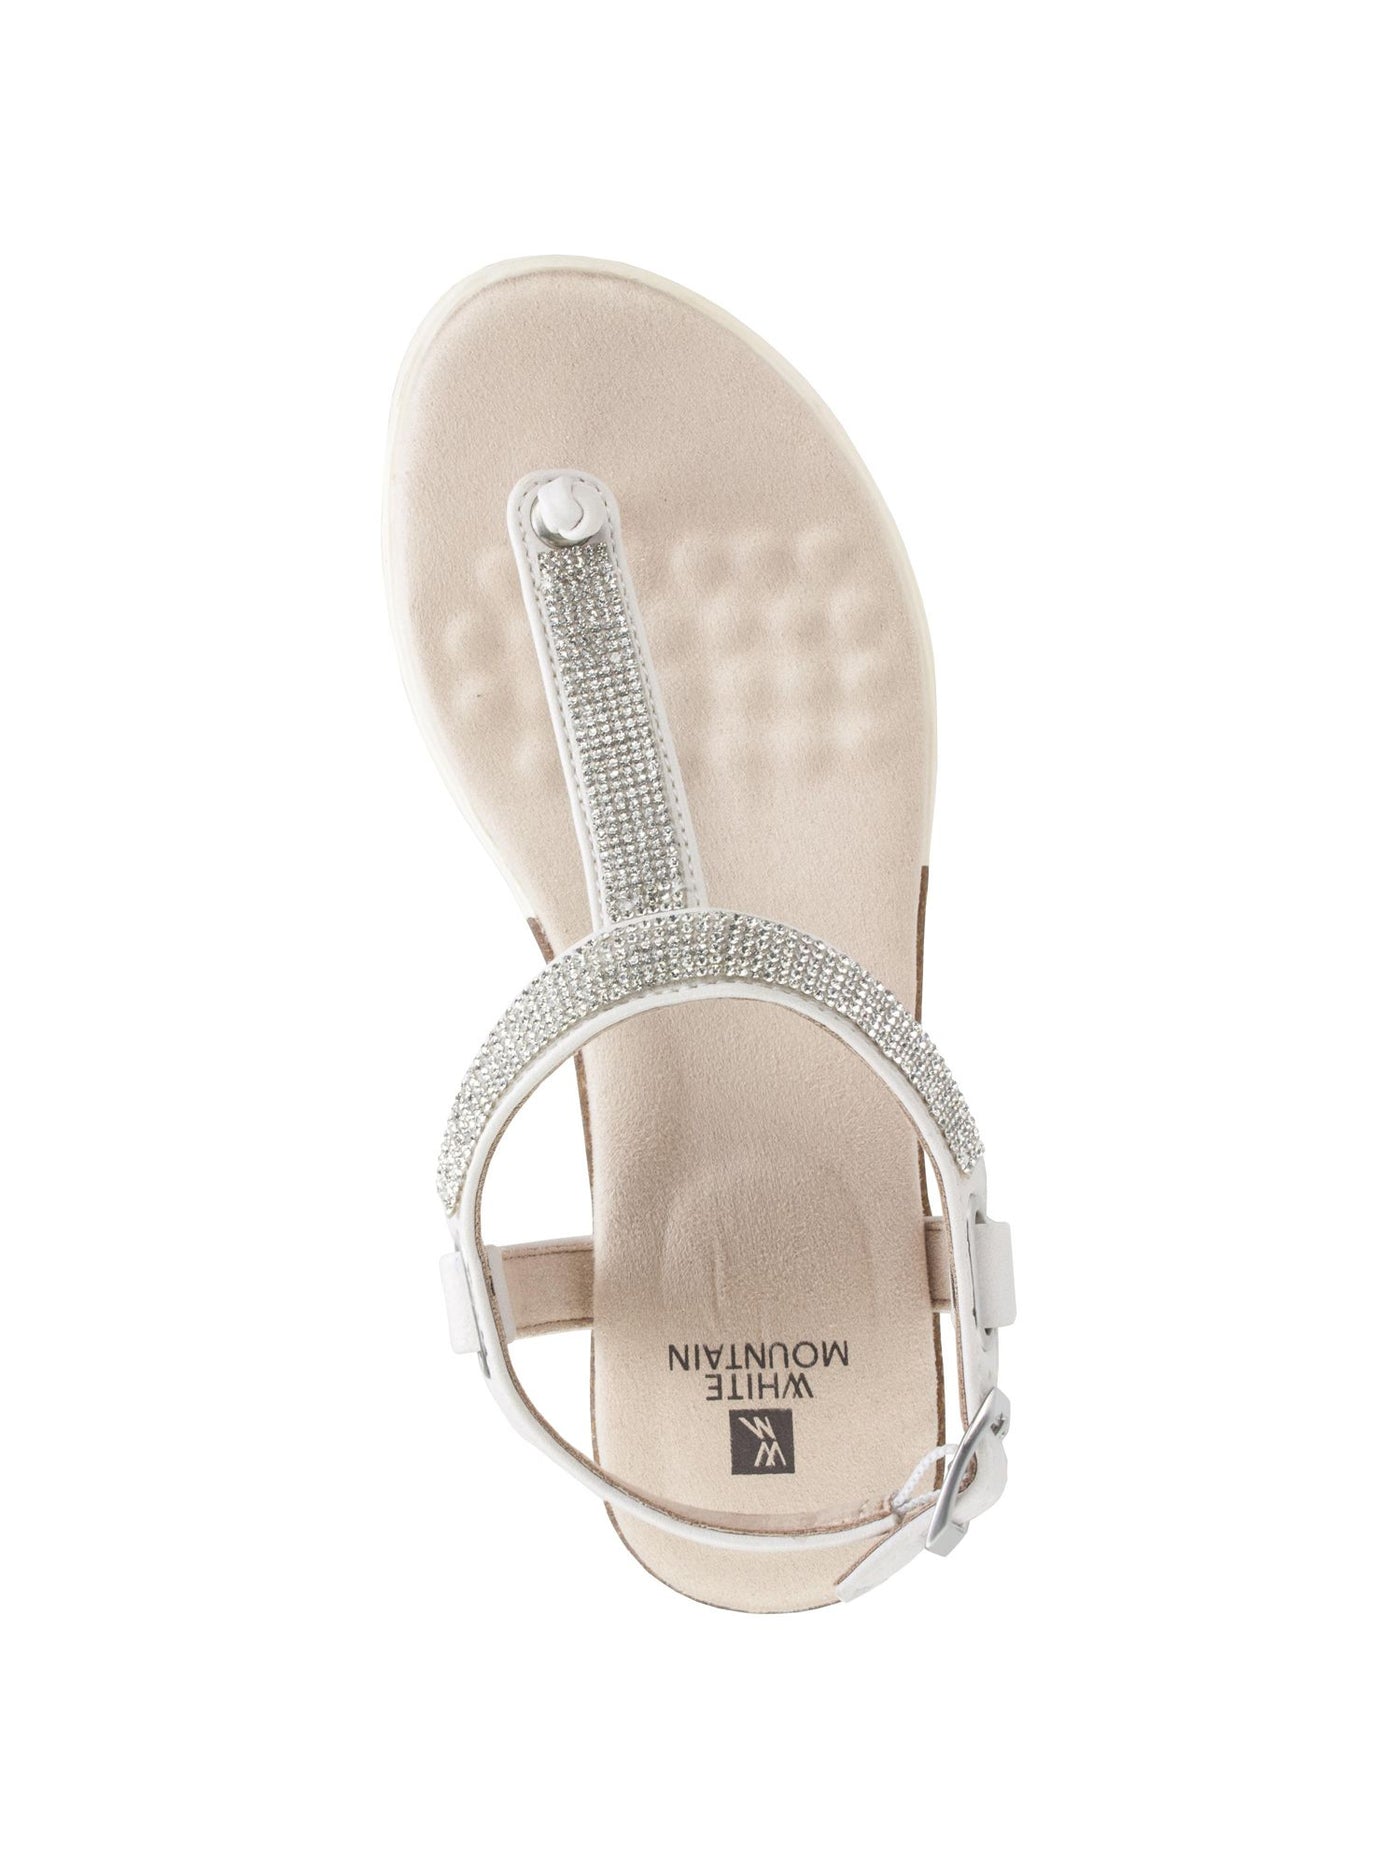 CHAMPION Womens Pink Adjustable Ankle Strap Cushioned Embellished T-Strap Parana Open Toe Buckle Thong Sandals 6 M